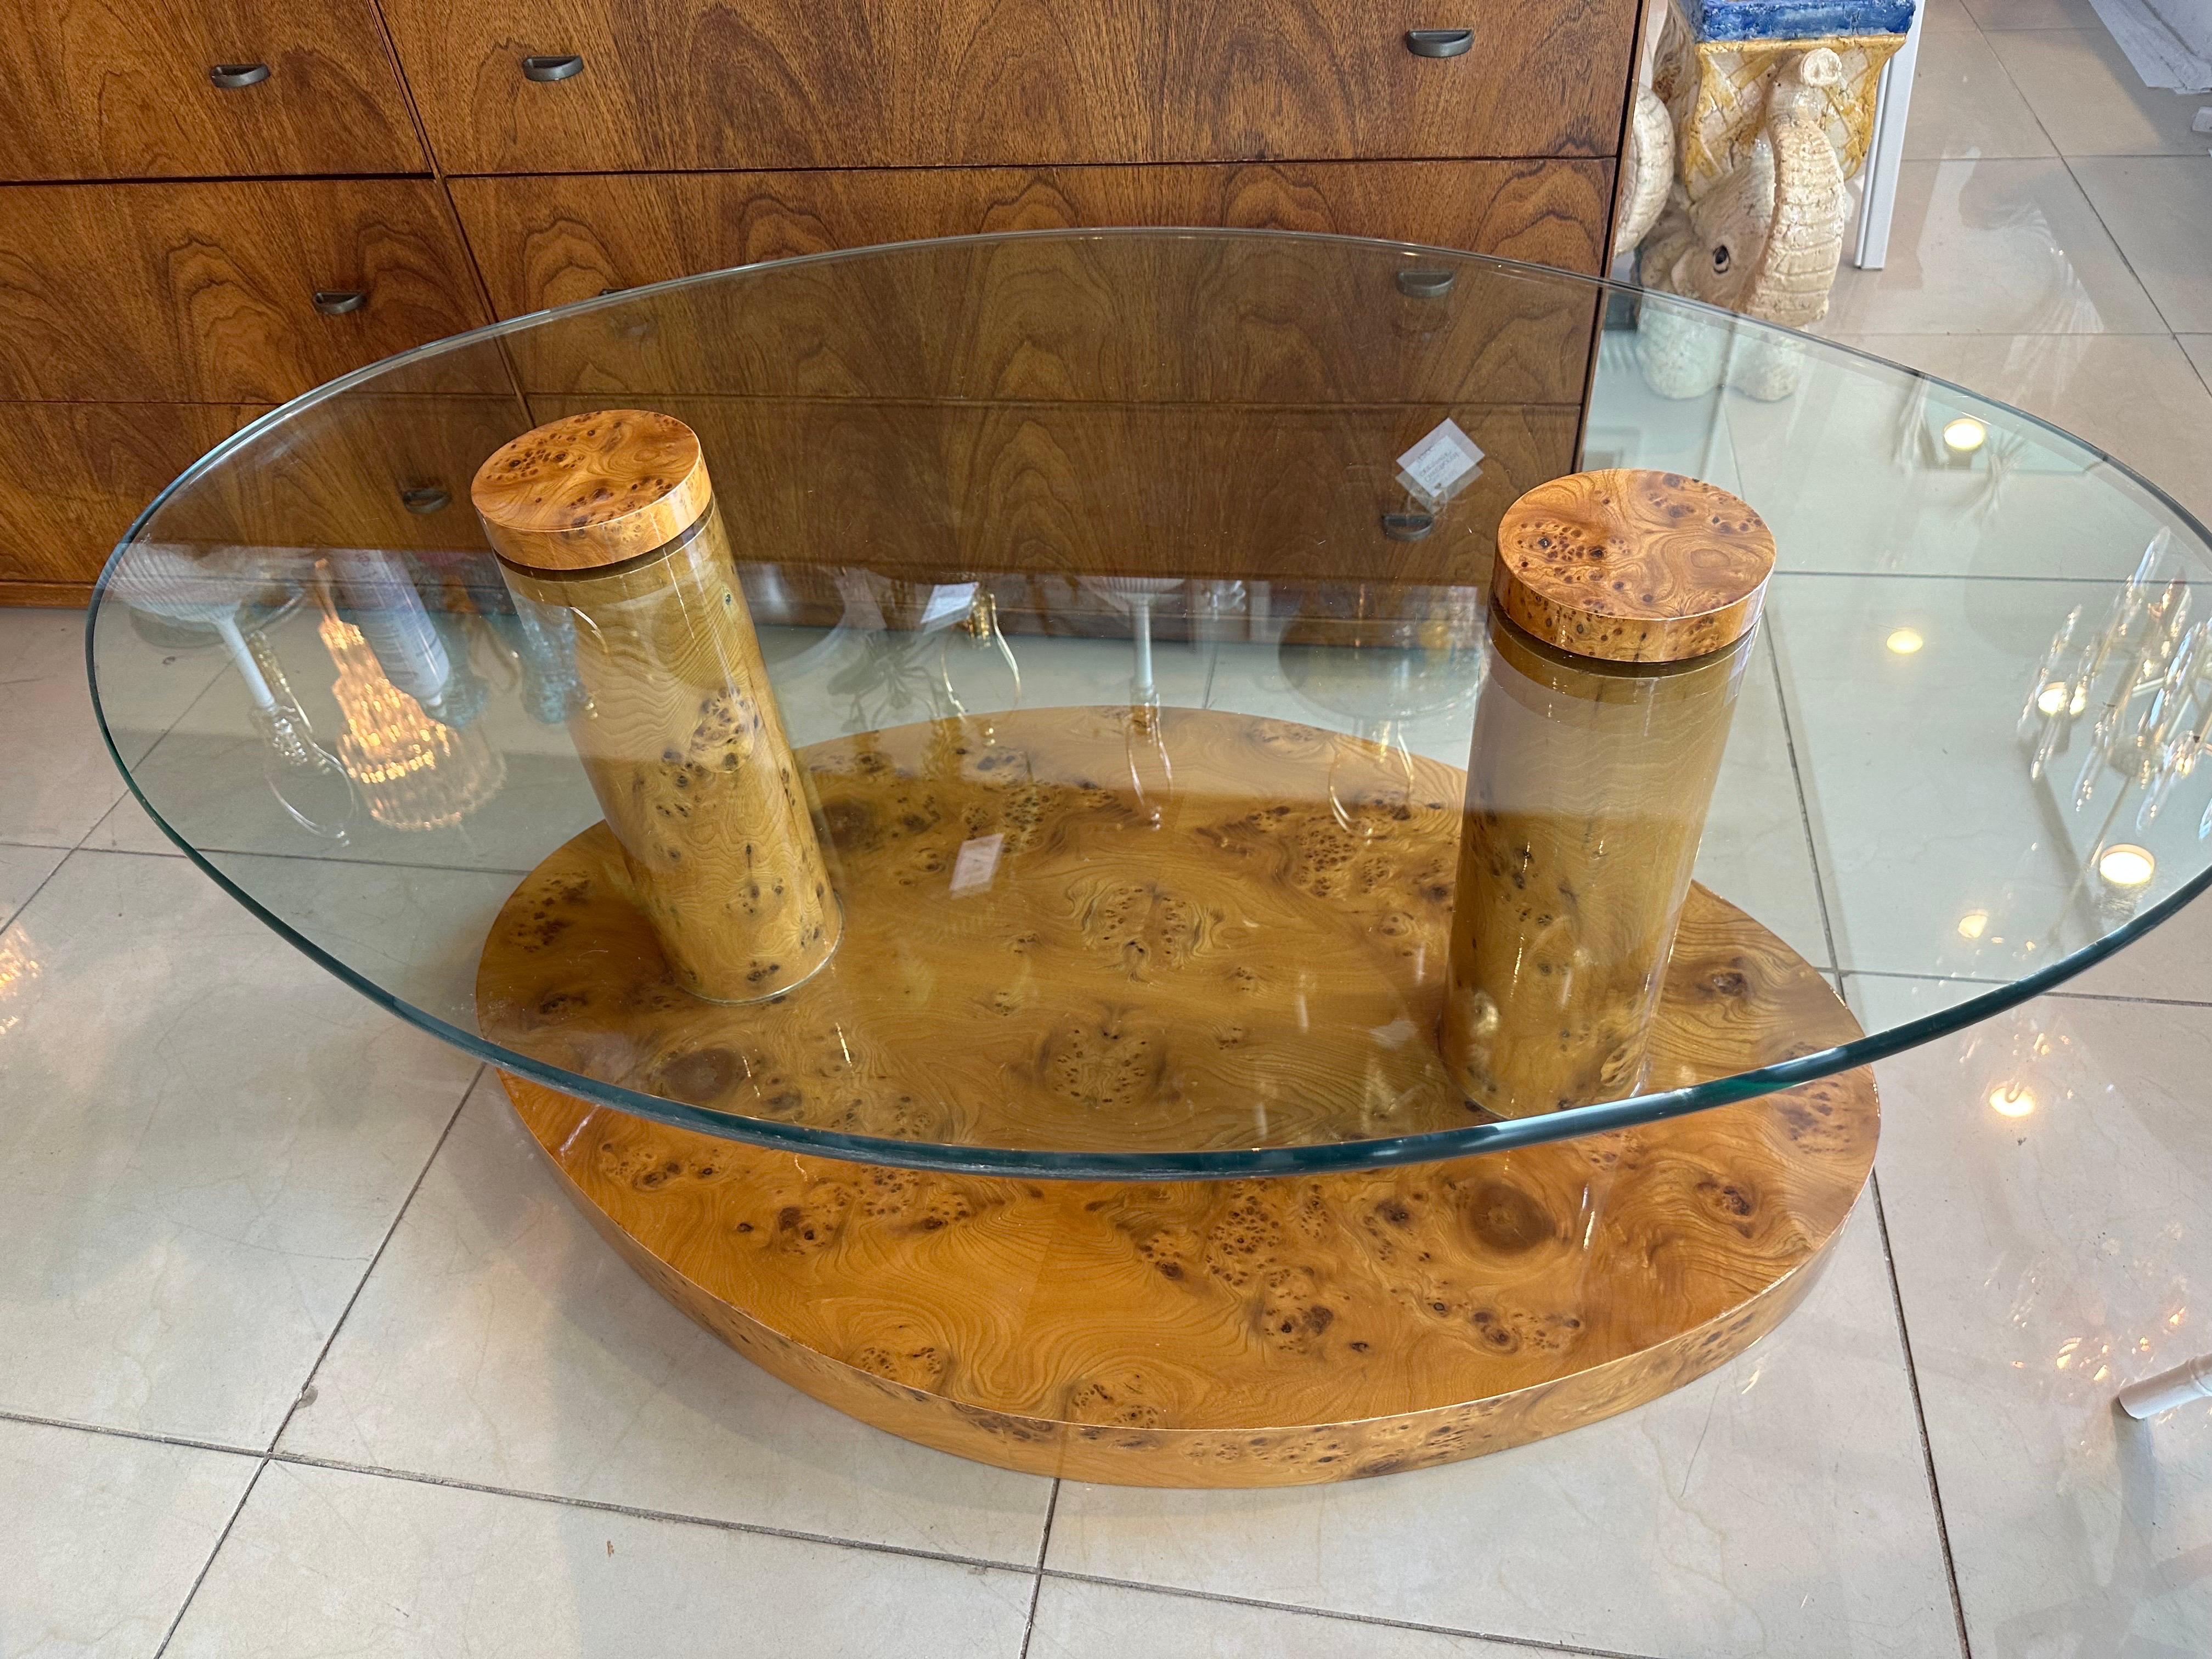 Lovely vintage burl wood Burled coffee cocktail table. The glass sits on top and the burl cap screw down on it. Original glass may have minor scratches. Dimensions: 18.5 H x 46 W x 31.5 D. Perfect for a yacht!  